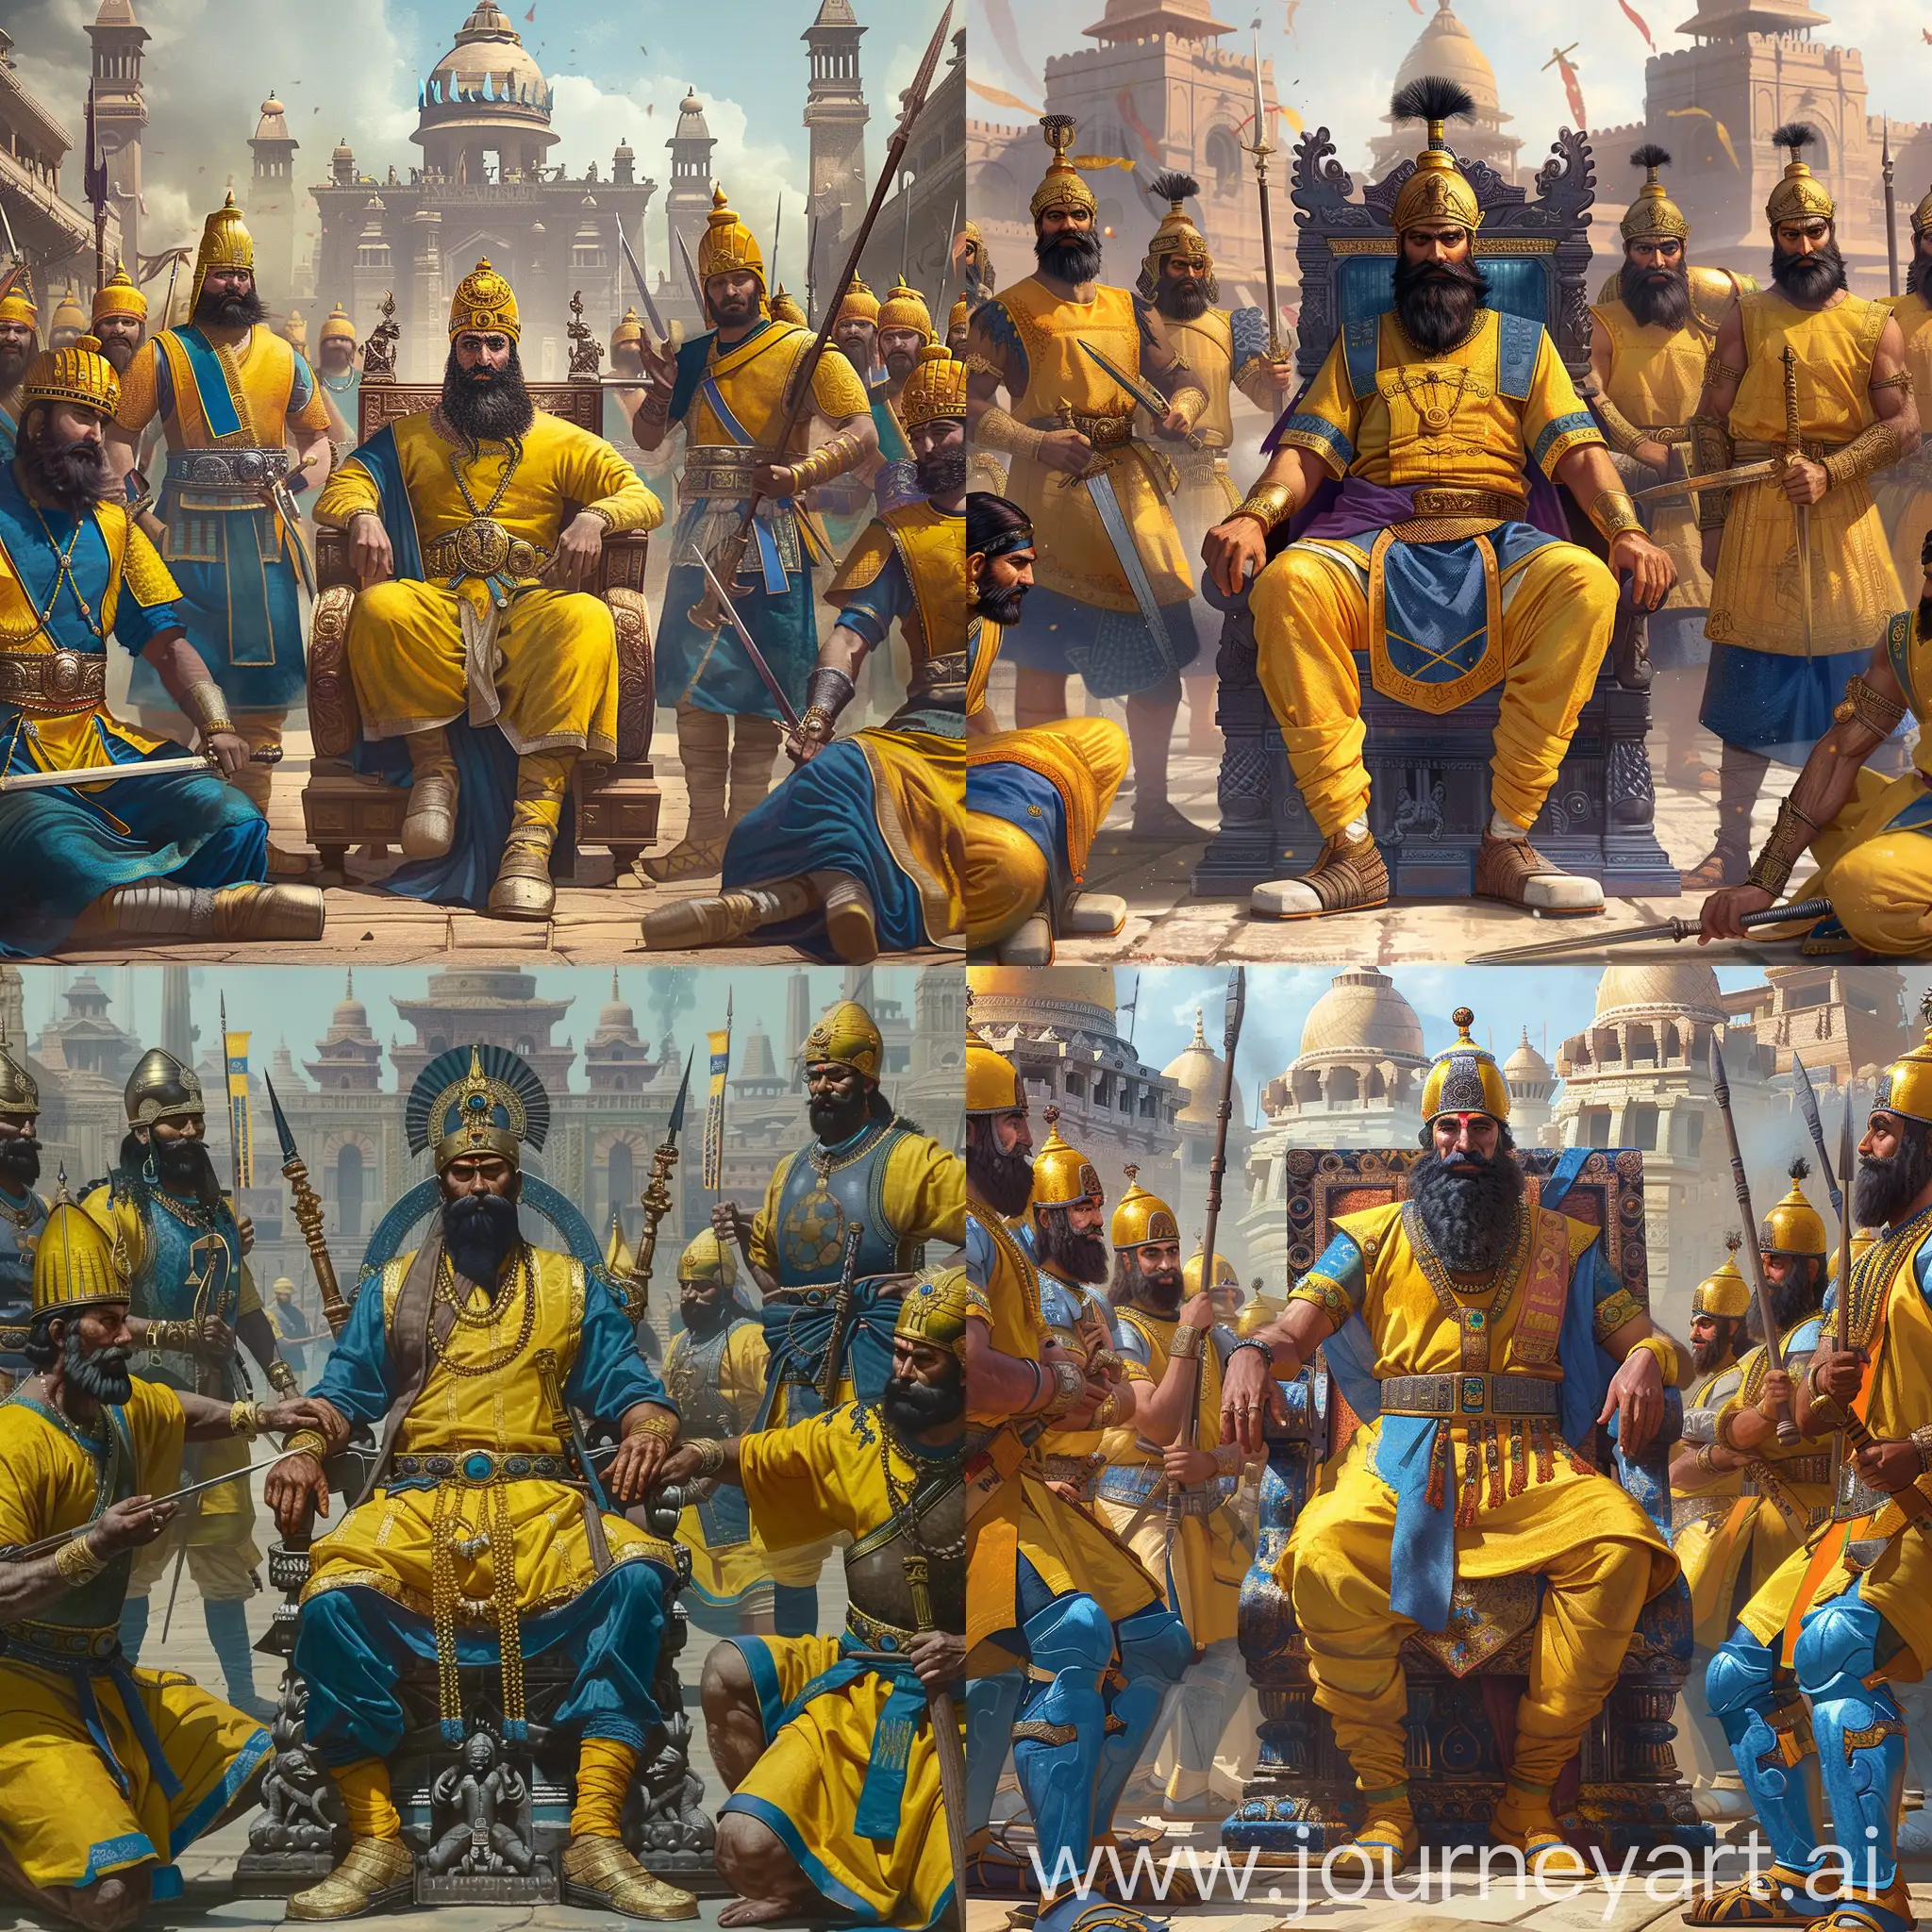 a middle-aged ancient Tocharians Kushan emperor is sitting on his imperial throne in the middle, he has black Indian style beard and yellow-blue Tocharians Kushan imperial costume,

other ancient Tocharians Kushan warriors are in yellow and blue color armor, they hold iron swords or spears in hands, they have Tocharians Kushan helmet and black beard, they stand around the emperor, with slippers on foot,

they are all before an ancient Indian Kushan palace, other Indian Kushan temples as background,